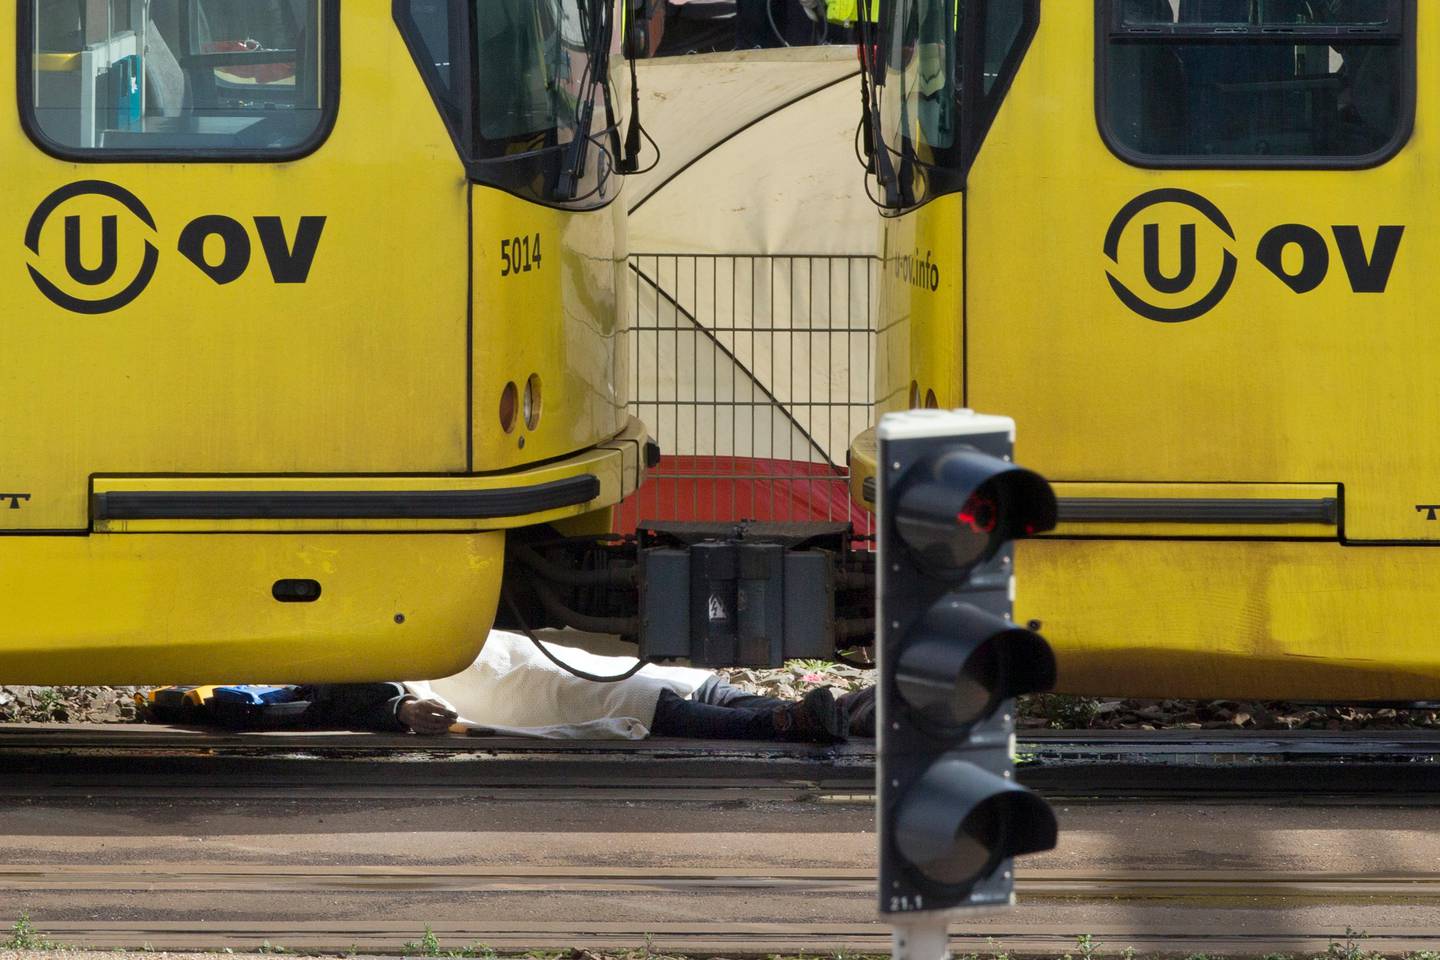 A body is covered with a blanket next to a tram following a shooting in Utrecht, Netherlands, Monday, March 18, 2019. Police in the central Dutch city of Utrecht say on Twitter that "multiple" people have been injured as a result of a shooting in a tram in a residential neighborhood. (AP Photo/Peter Dejong)